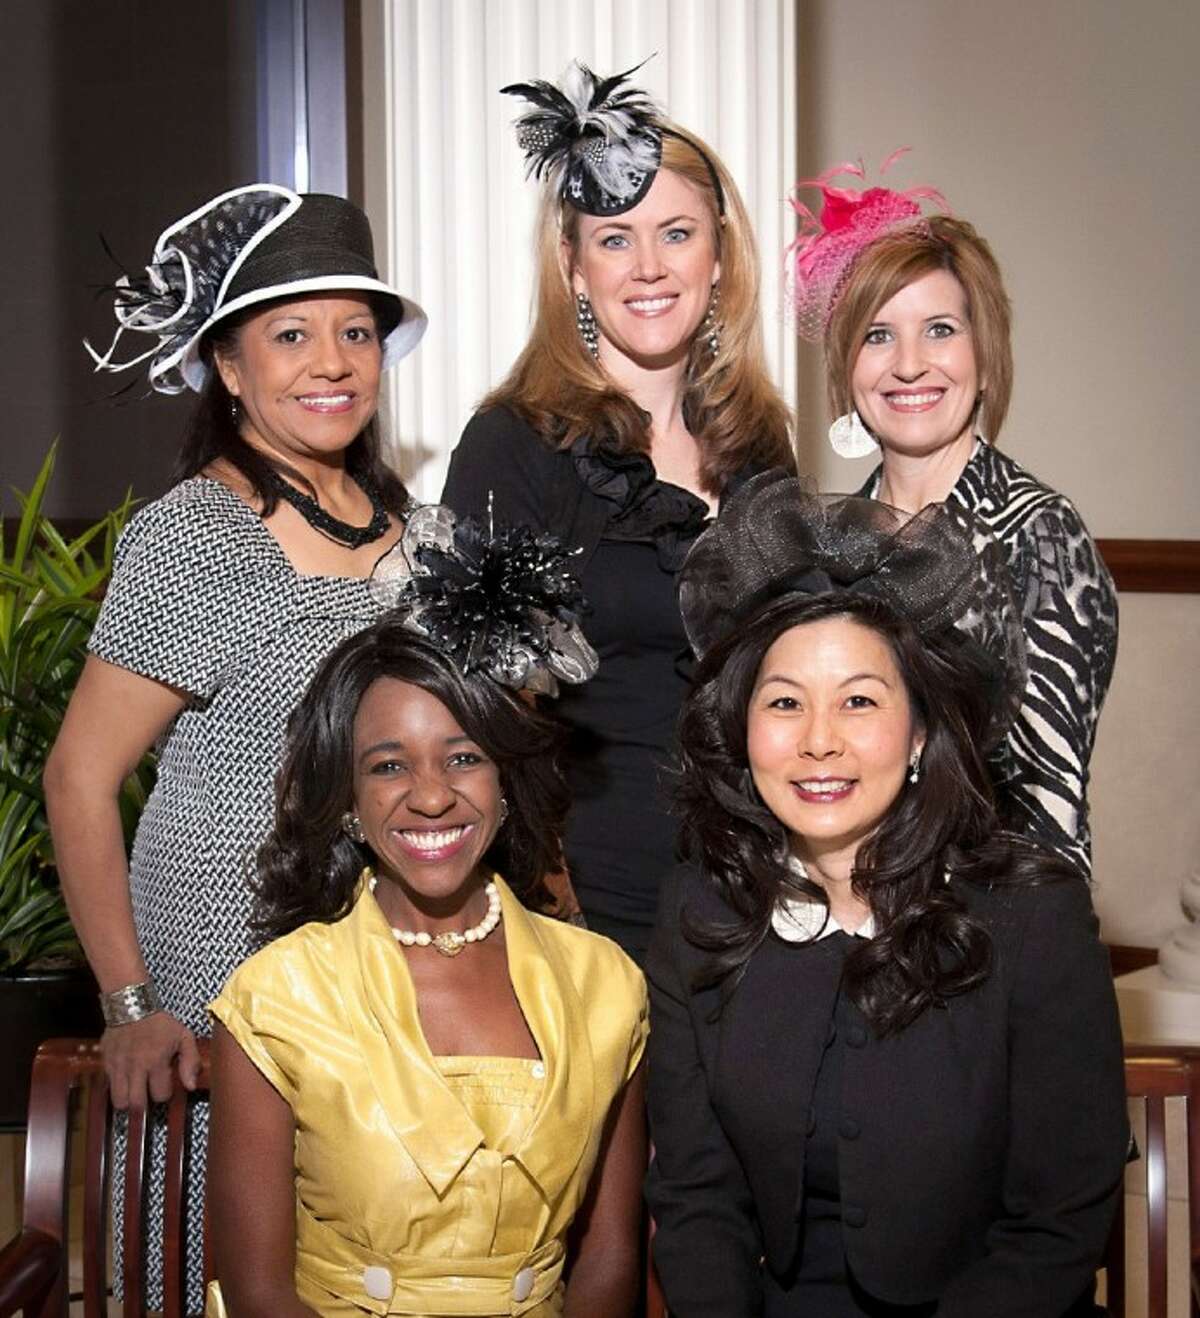 The 2012 Mad Hatter Spring Luncheon & Fashion Show Committee is, from the left (front row): Jacquie Baly Chaumette - Mad Hatter Luncheon Honorary Chair, Terri Wang - Mad Hatter Chair; (back row) Manuela Arroyos - Fort Bend Seniors CEO; Jeni Scarborough - Table Décor Chair; Kristin Weiss - Fort Bend Seniors Director of Development. Not pictured are Dorris Irving - Fashion Show Manager; and Heather Carroll - Raffle/Silent Auction Chair.